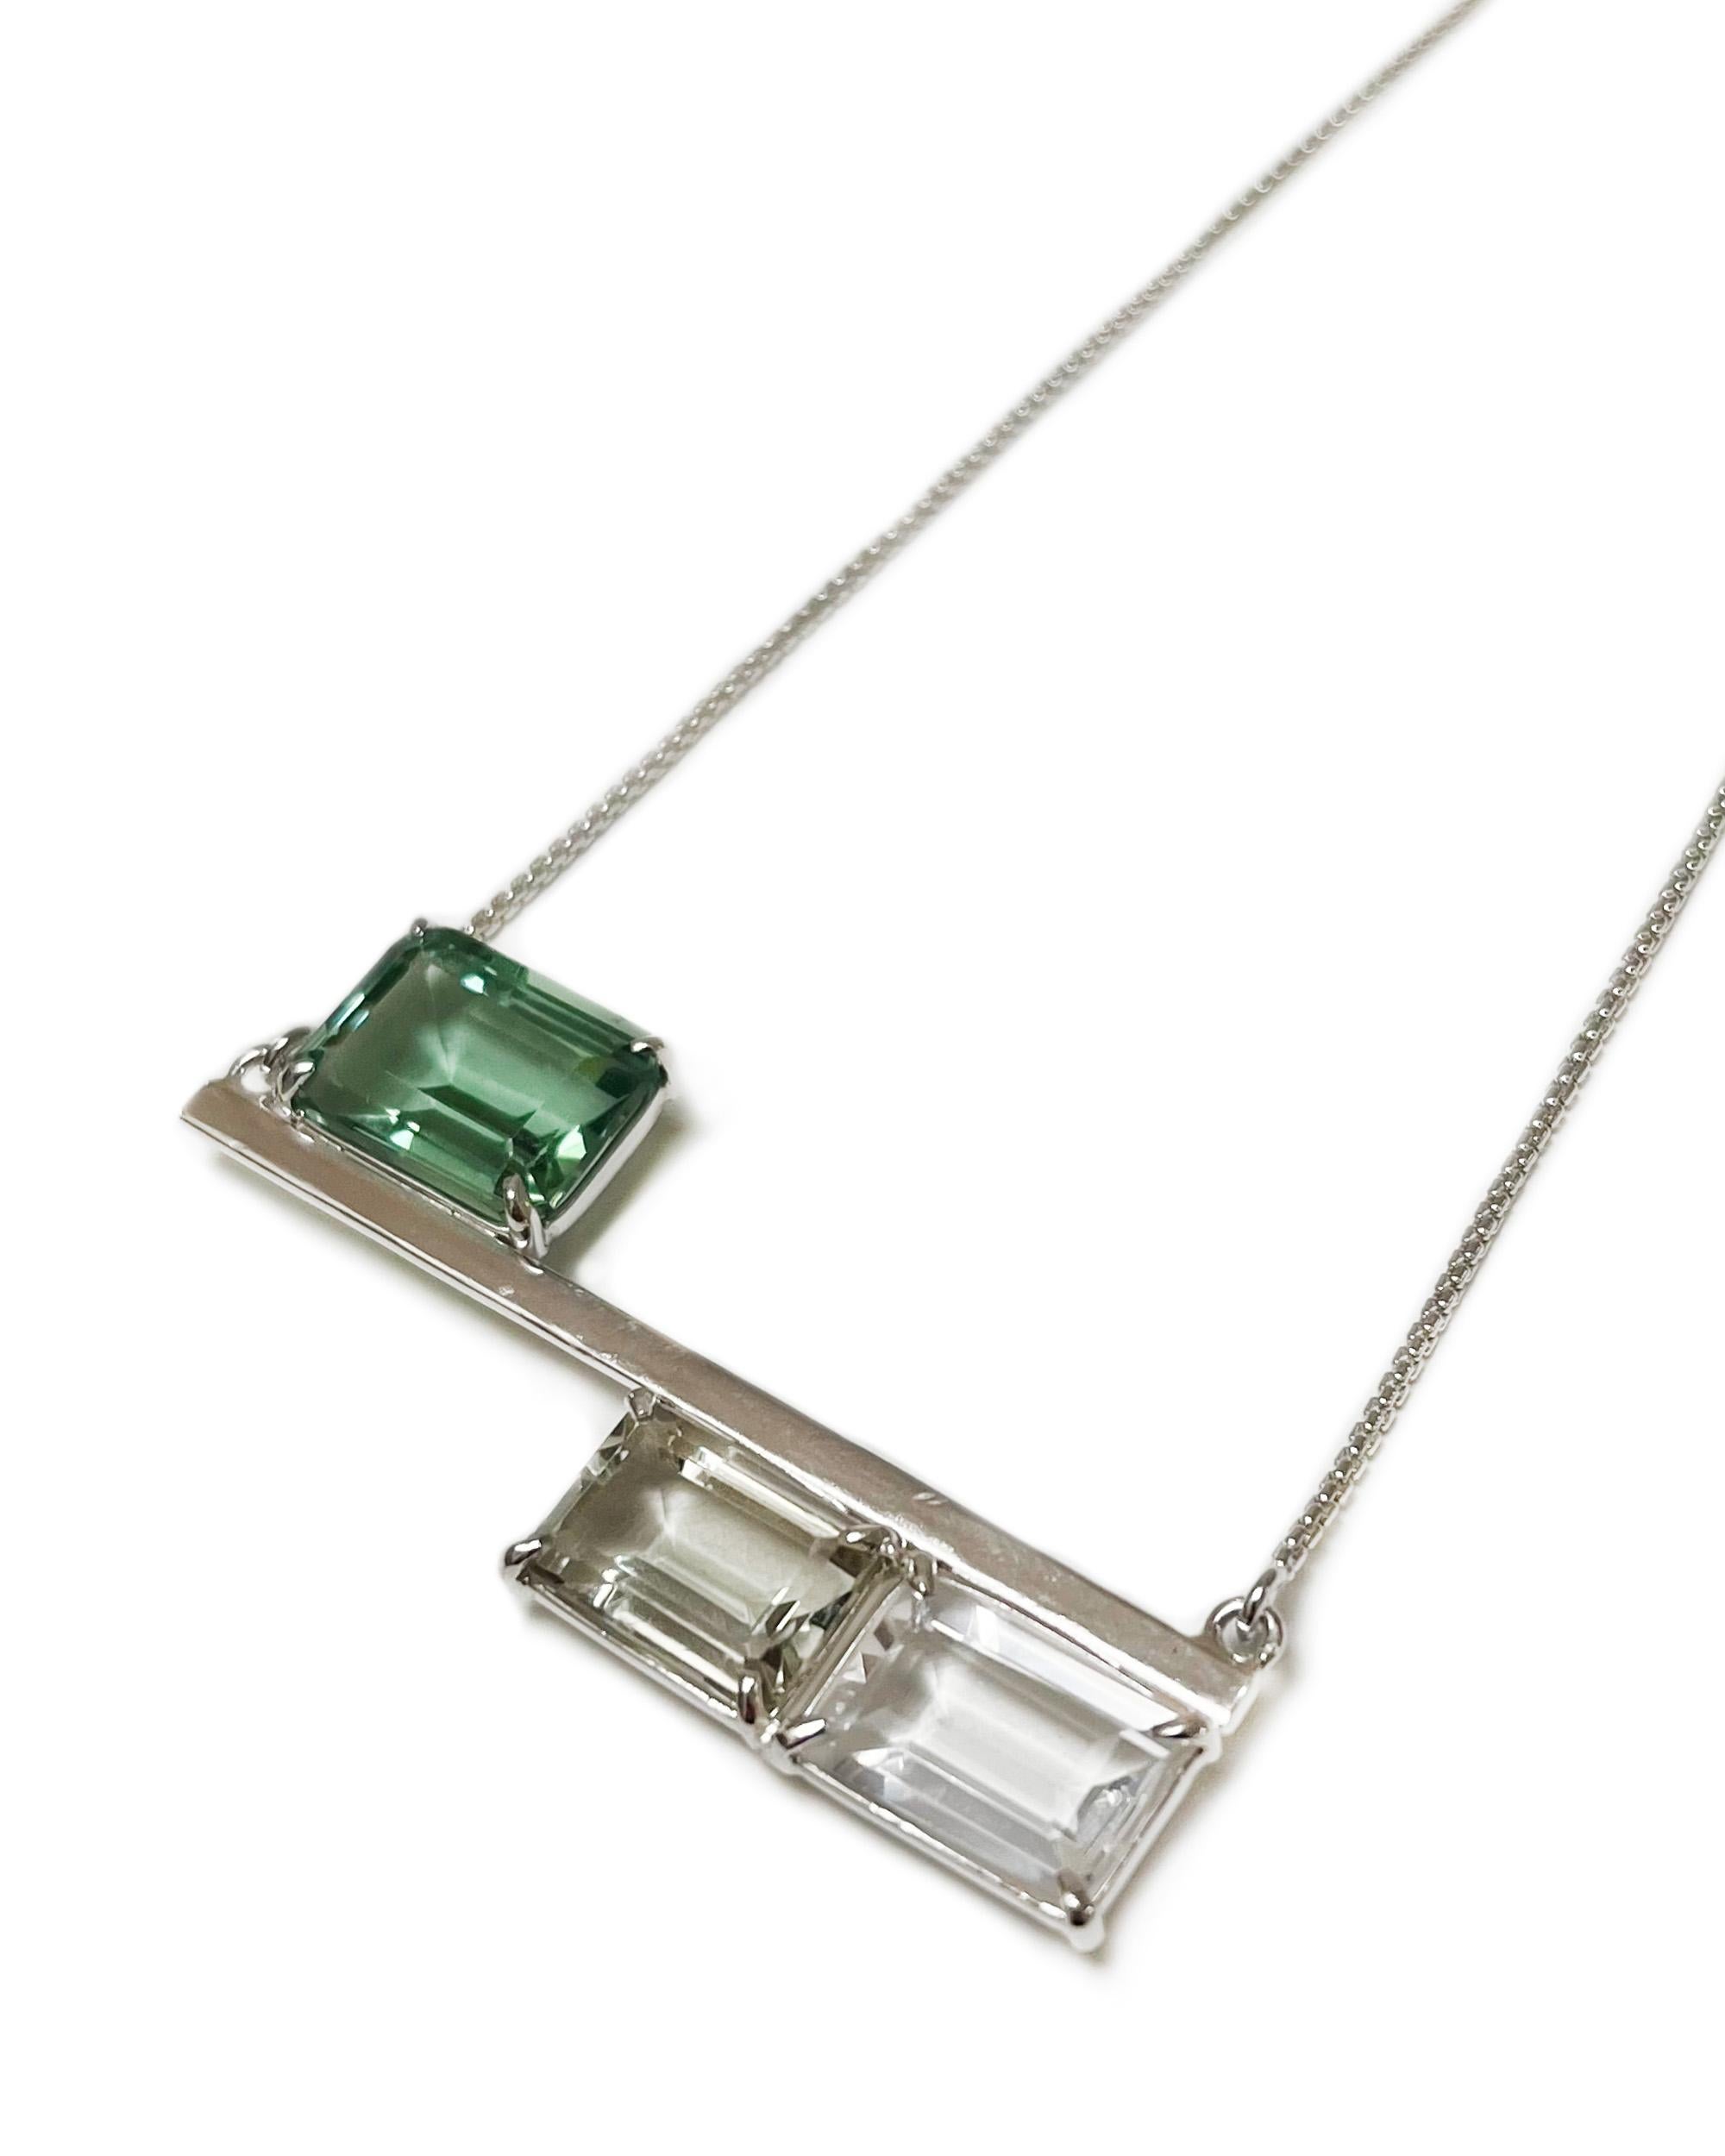 Intention: Balance

Design: This unique sterling silver bar necklace has three strategically placed stones in gradients of green. Emerald-cut green quartz transitions to soft green prasiolite and crisp white topaz, keeping your balances in check.